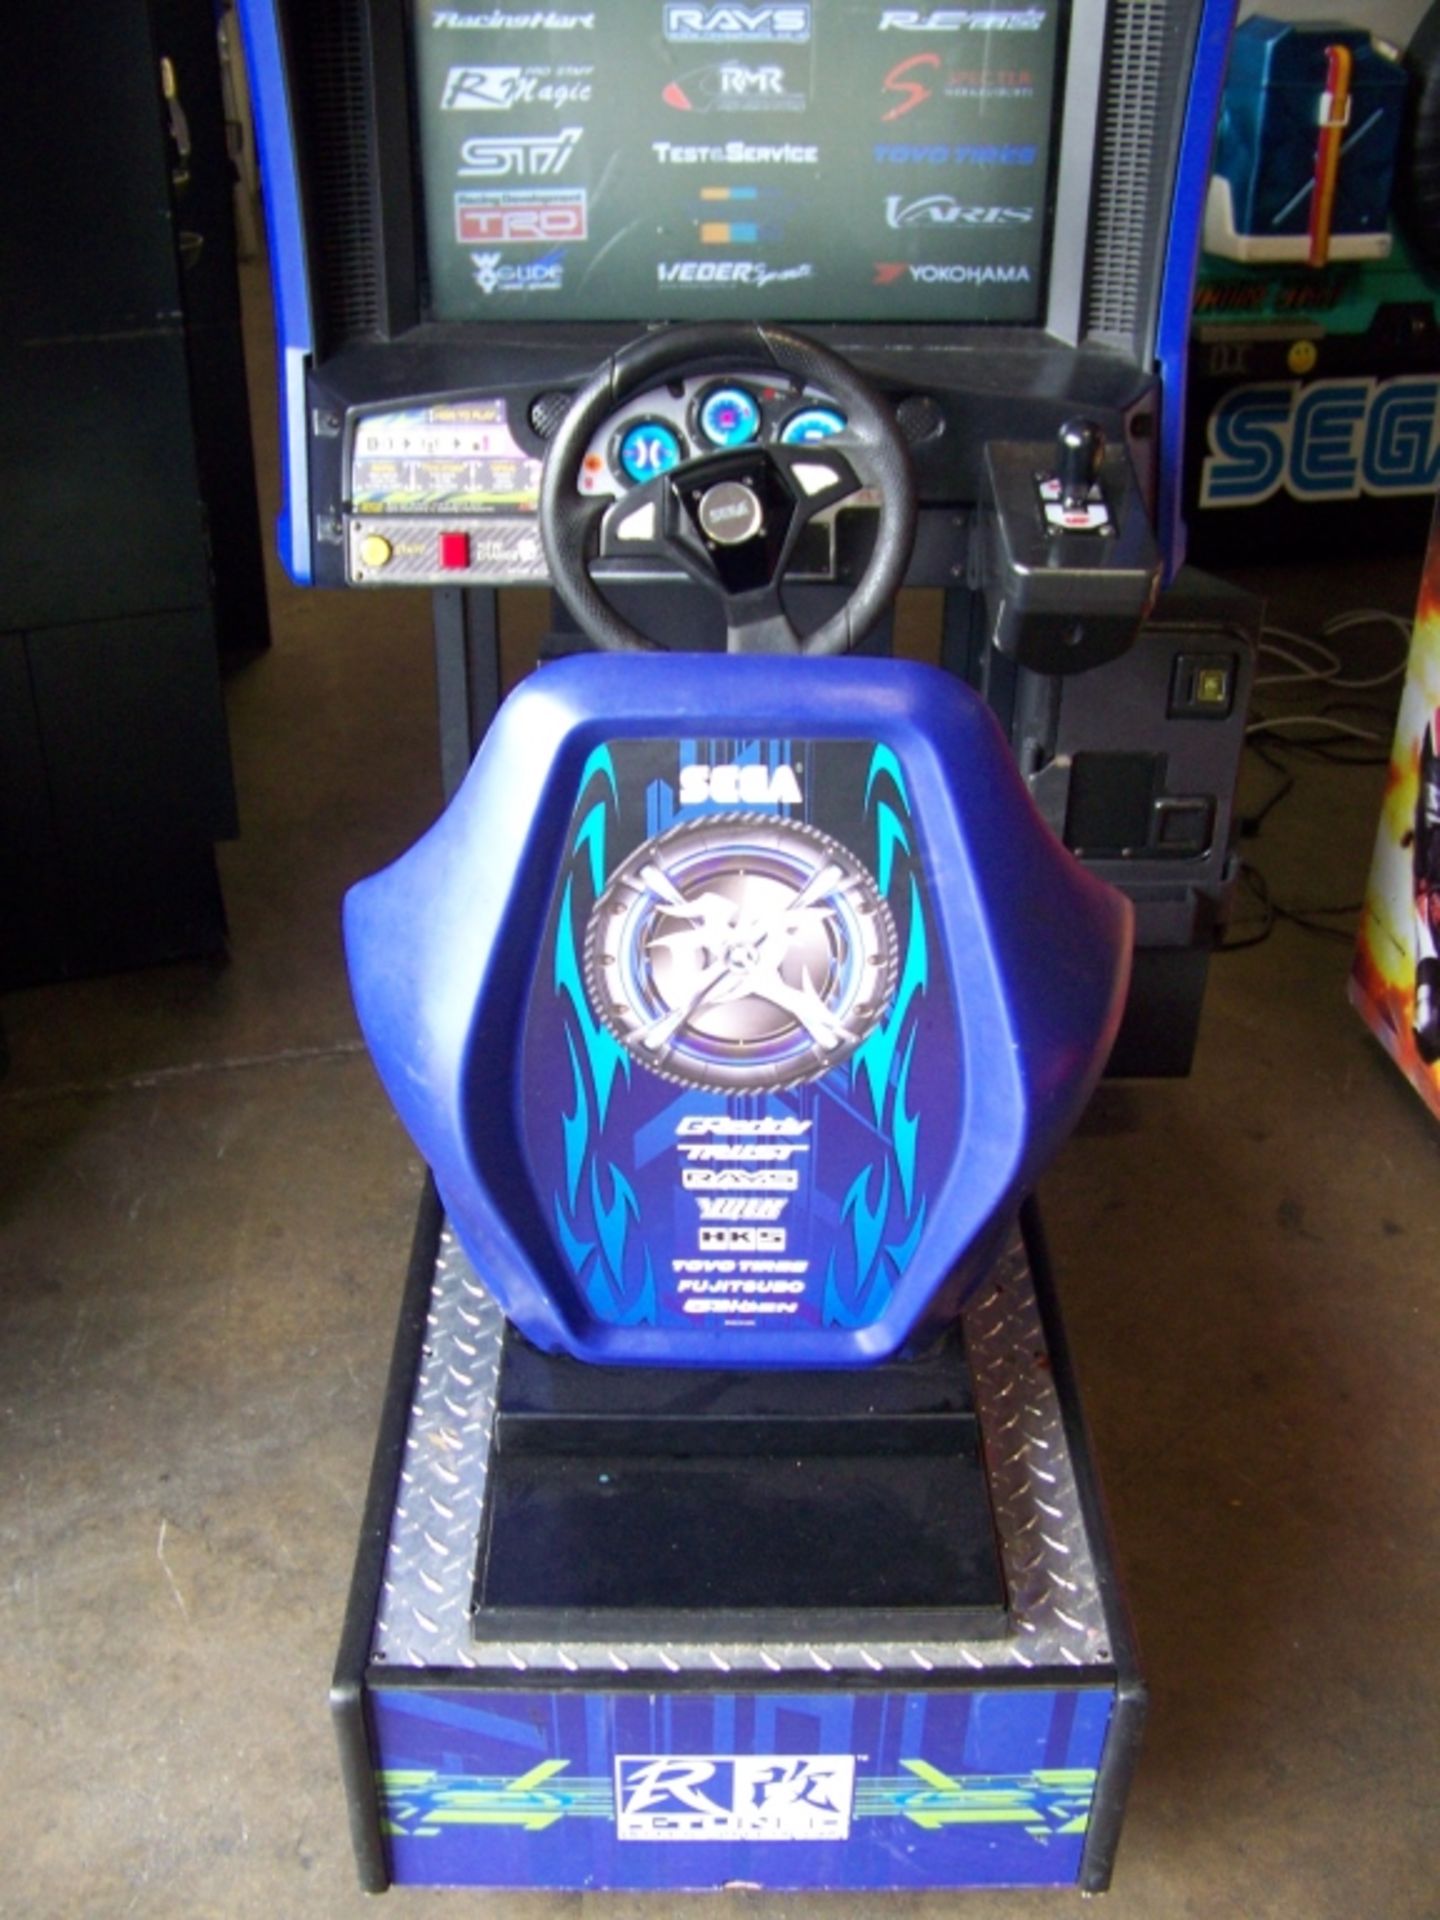 R-TUNED STREET RACING ARCADE GAME SEGA Item is in used condition. Evidence of wear and commercial - Image 3 of 5